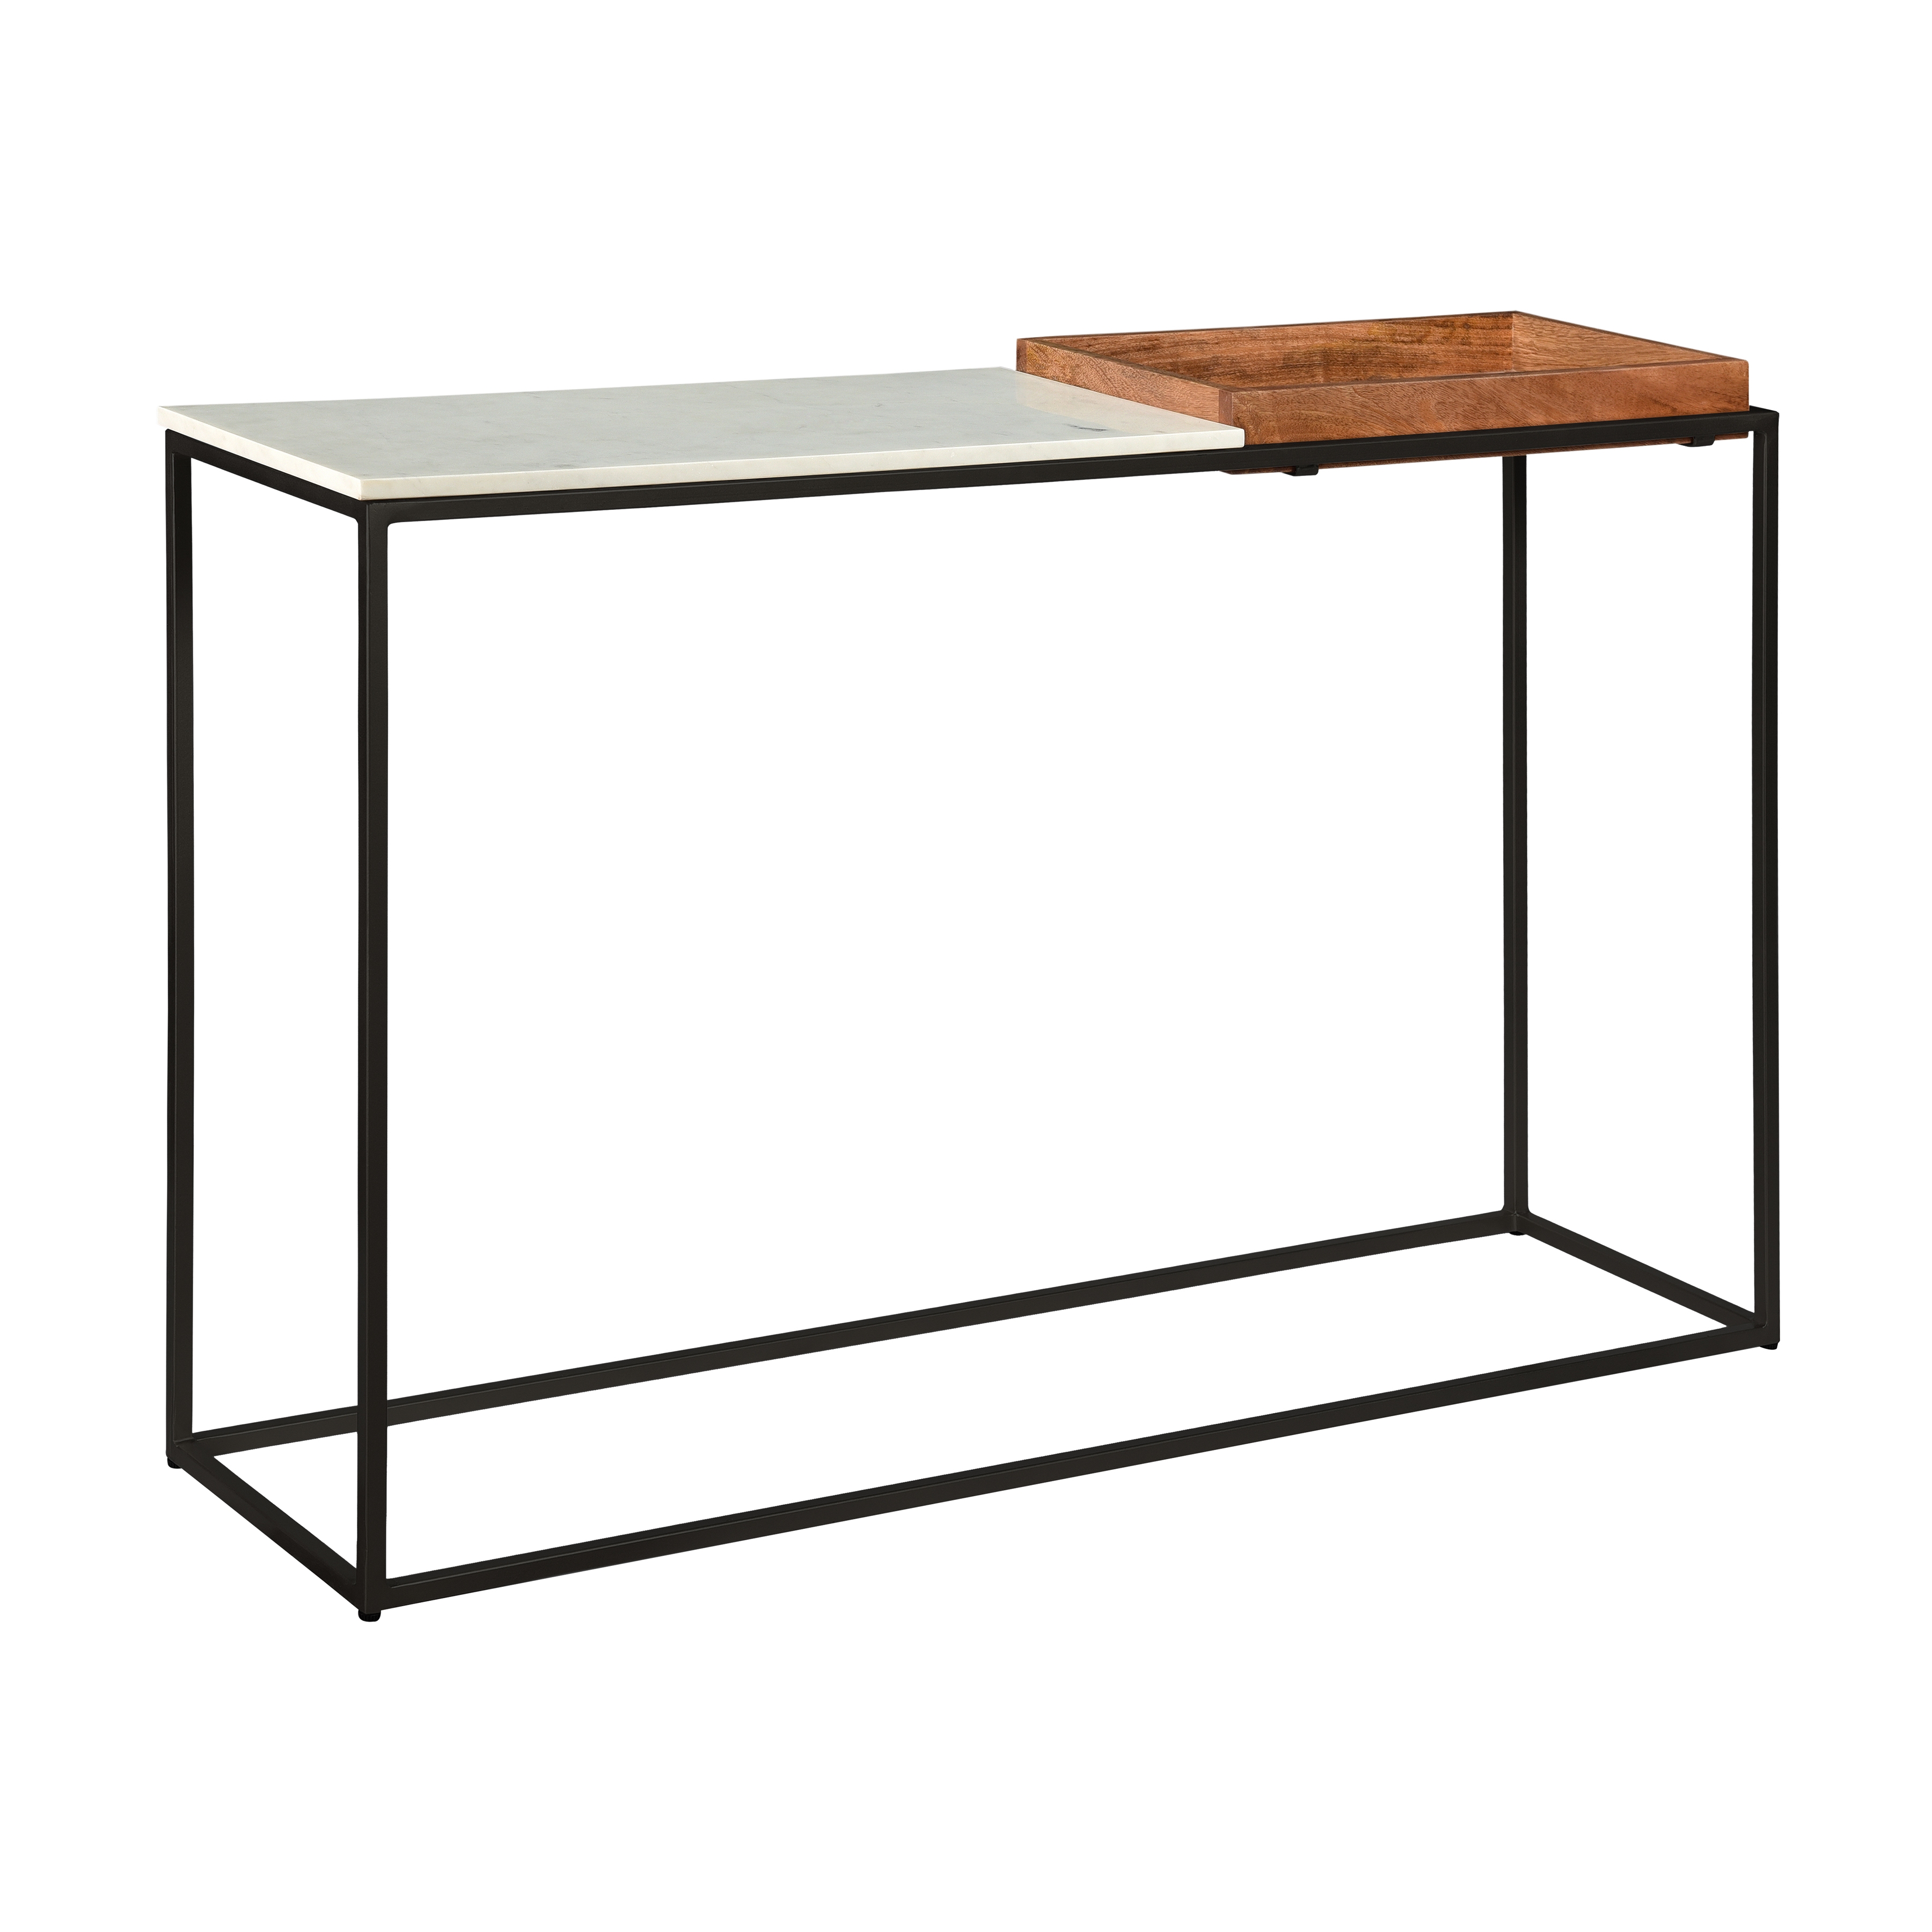 Norman Console Table - Image 1